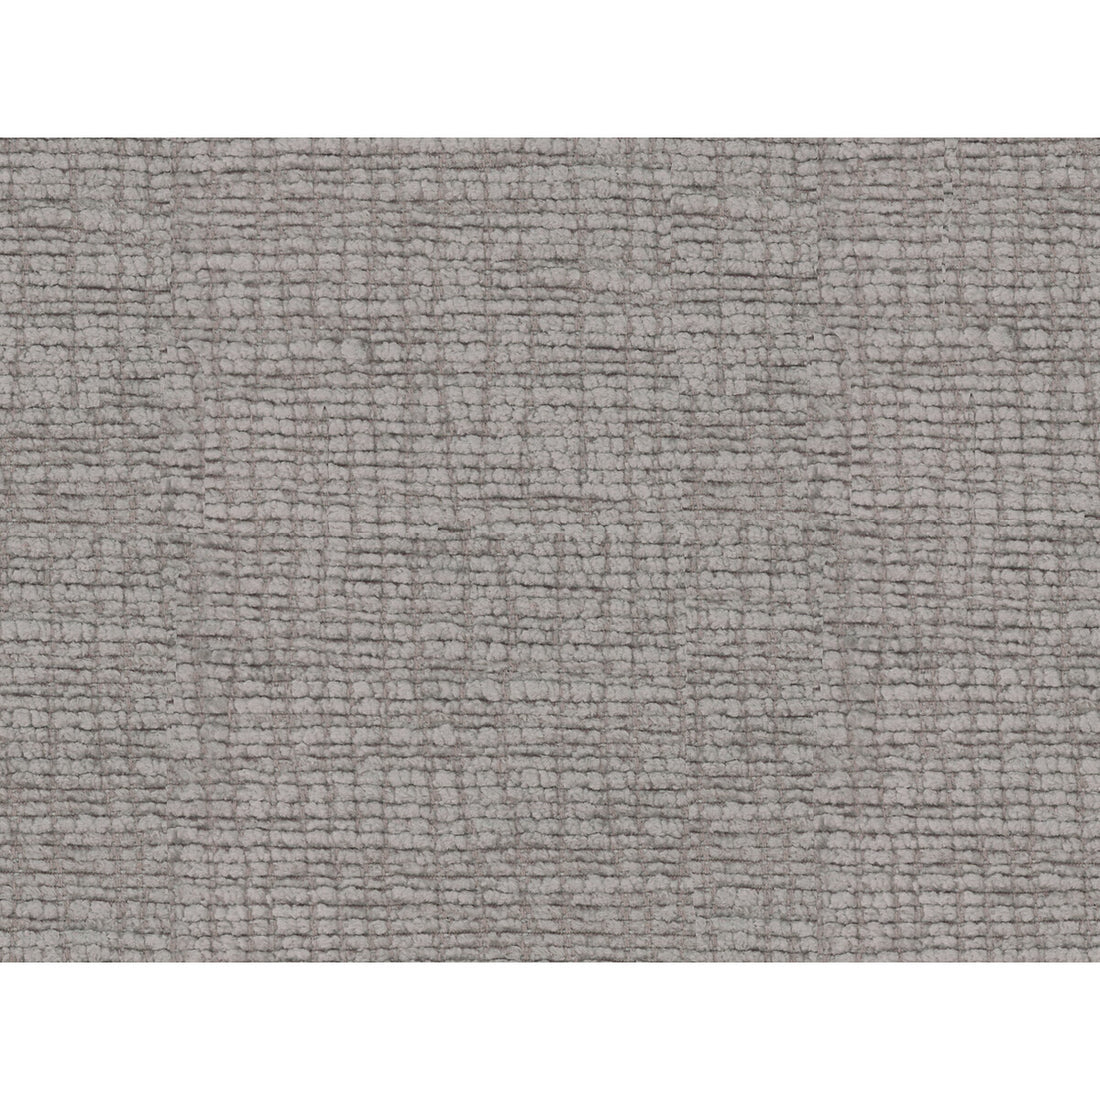 Clever Cut fabric in platinum color - pattern 34456.11.0 - by Kravet Couture